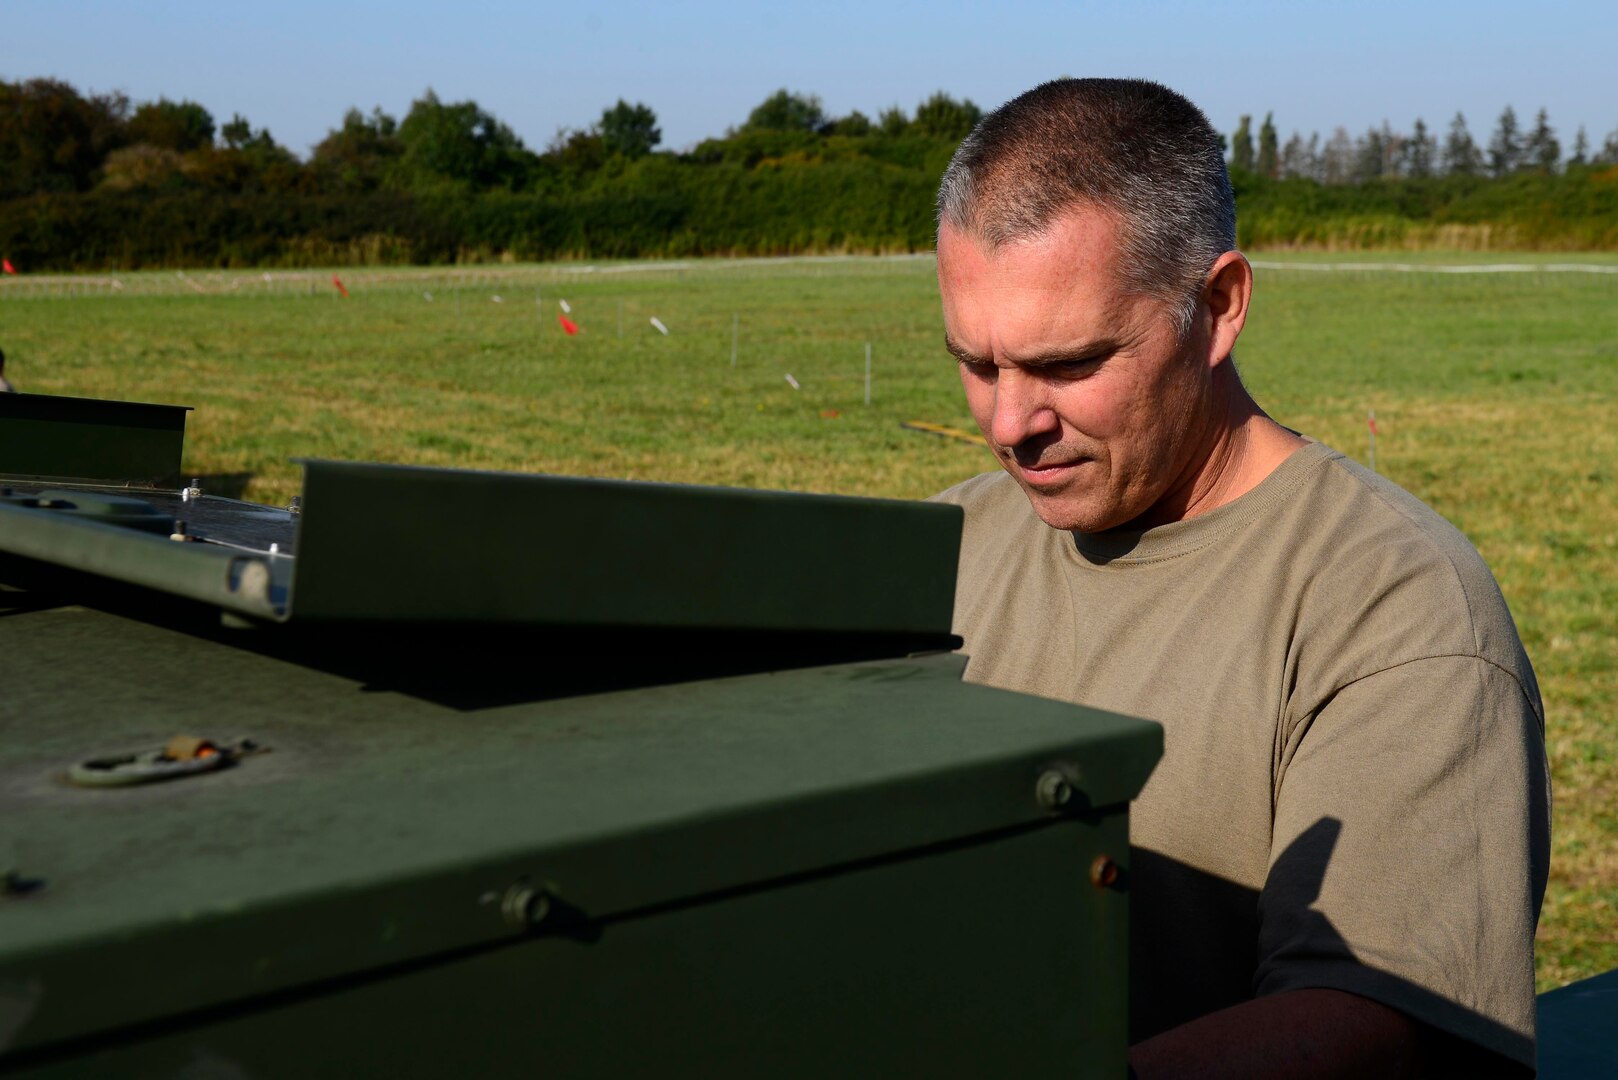 U.S. Air National Guard Master Sgt. Jared Hass, 116th Air Control Squadron, checks a generator during exercise Astral Knight 20 at Malbork Air Base, Poland, Sept. 23, 2020. Members of the 116th and 128th ACS augmented the 606th ACS during AK20.